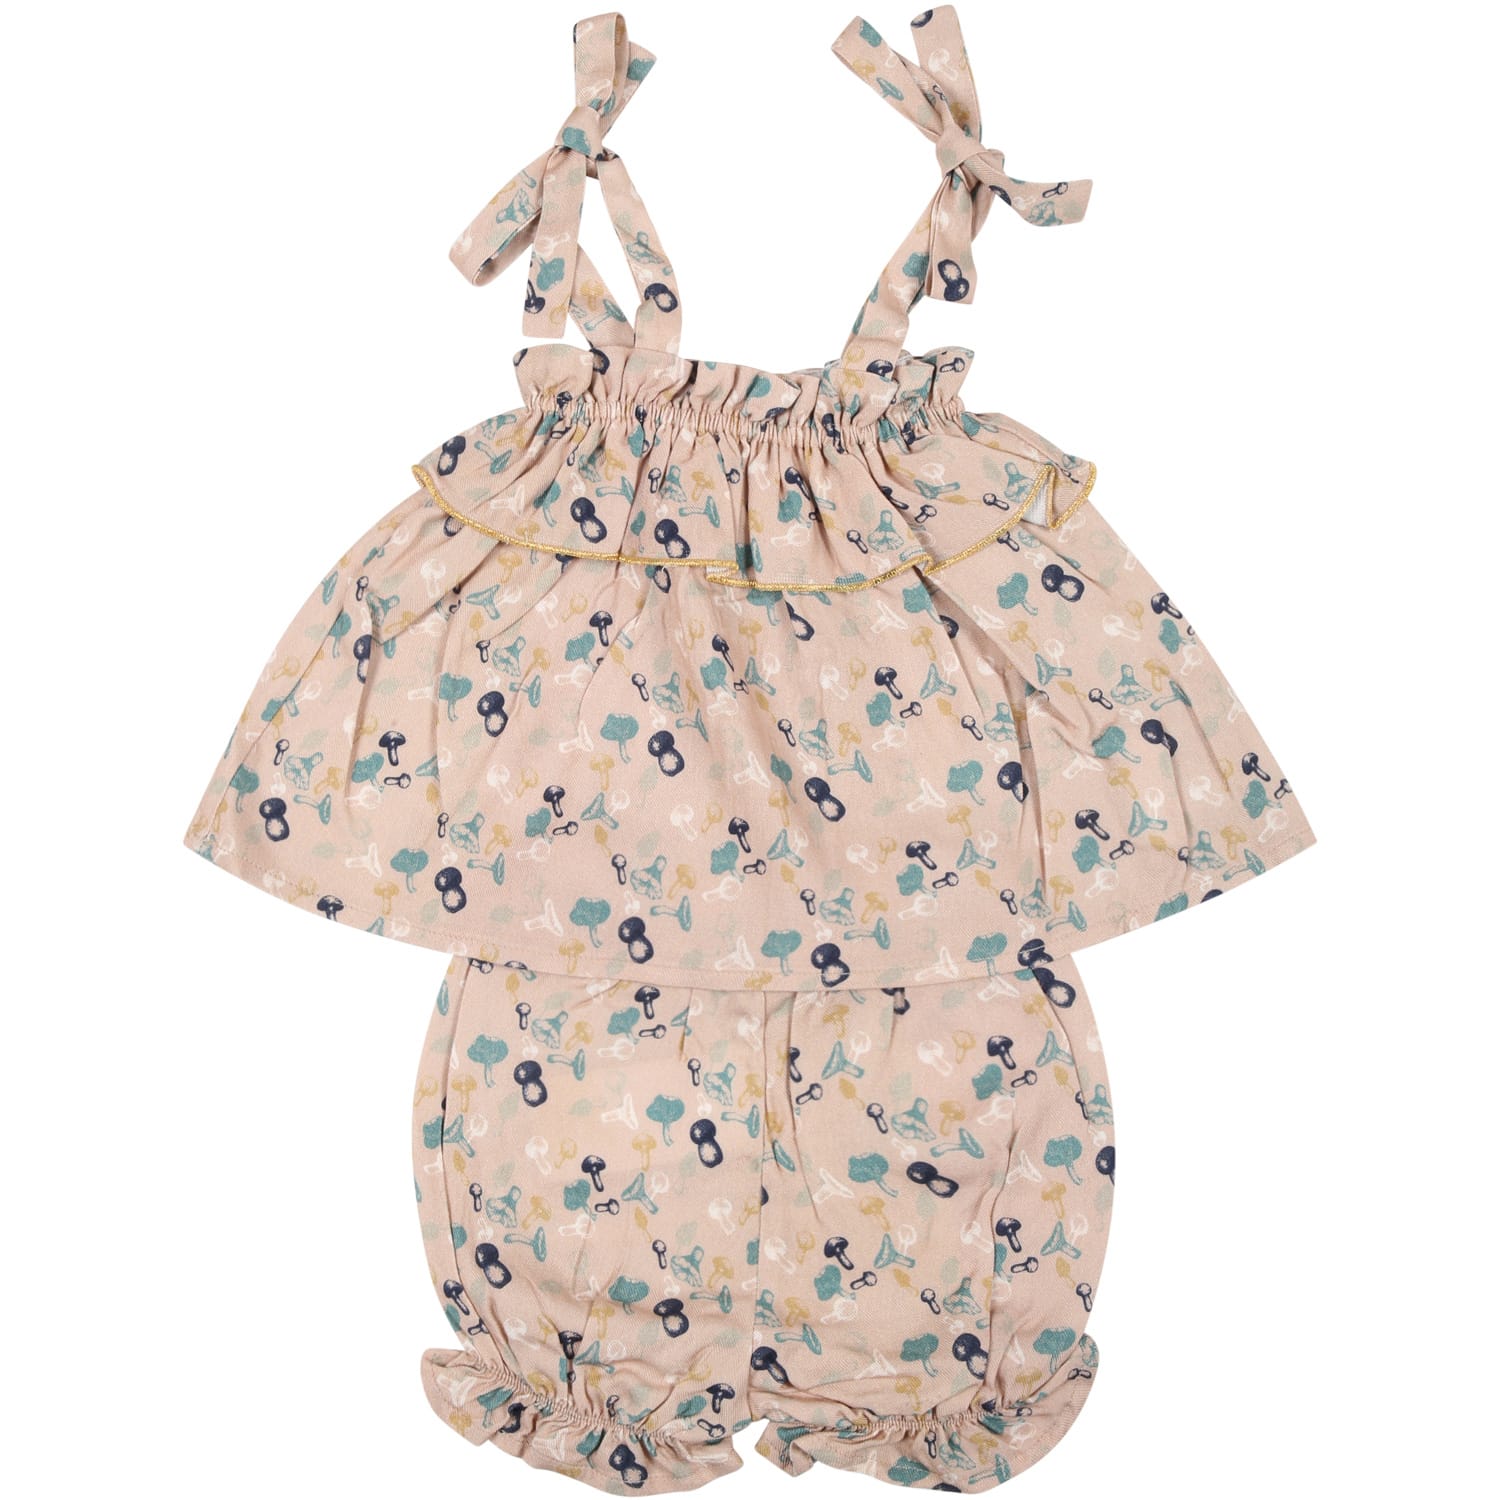 Coco Au Lait Pink Suit For Baby Girl With Colorful Mushrooms